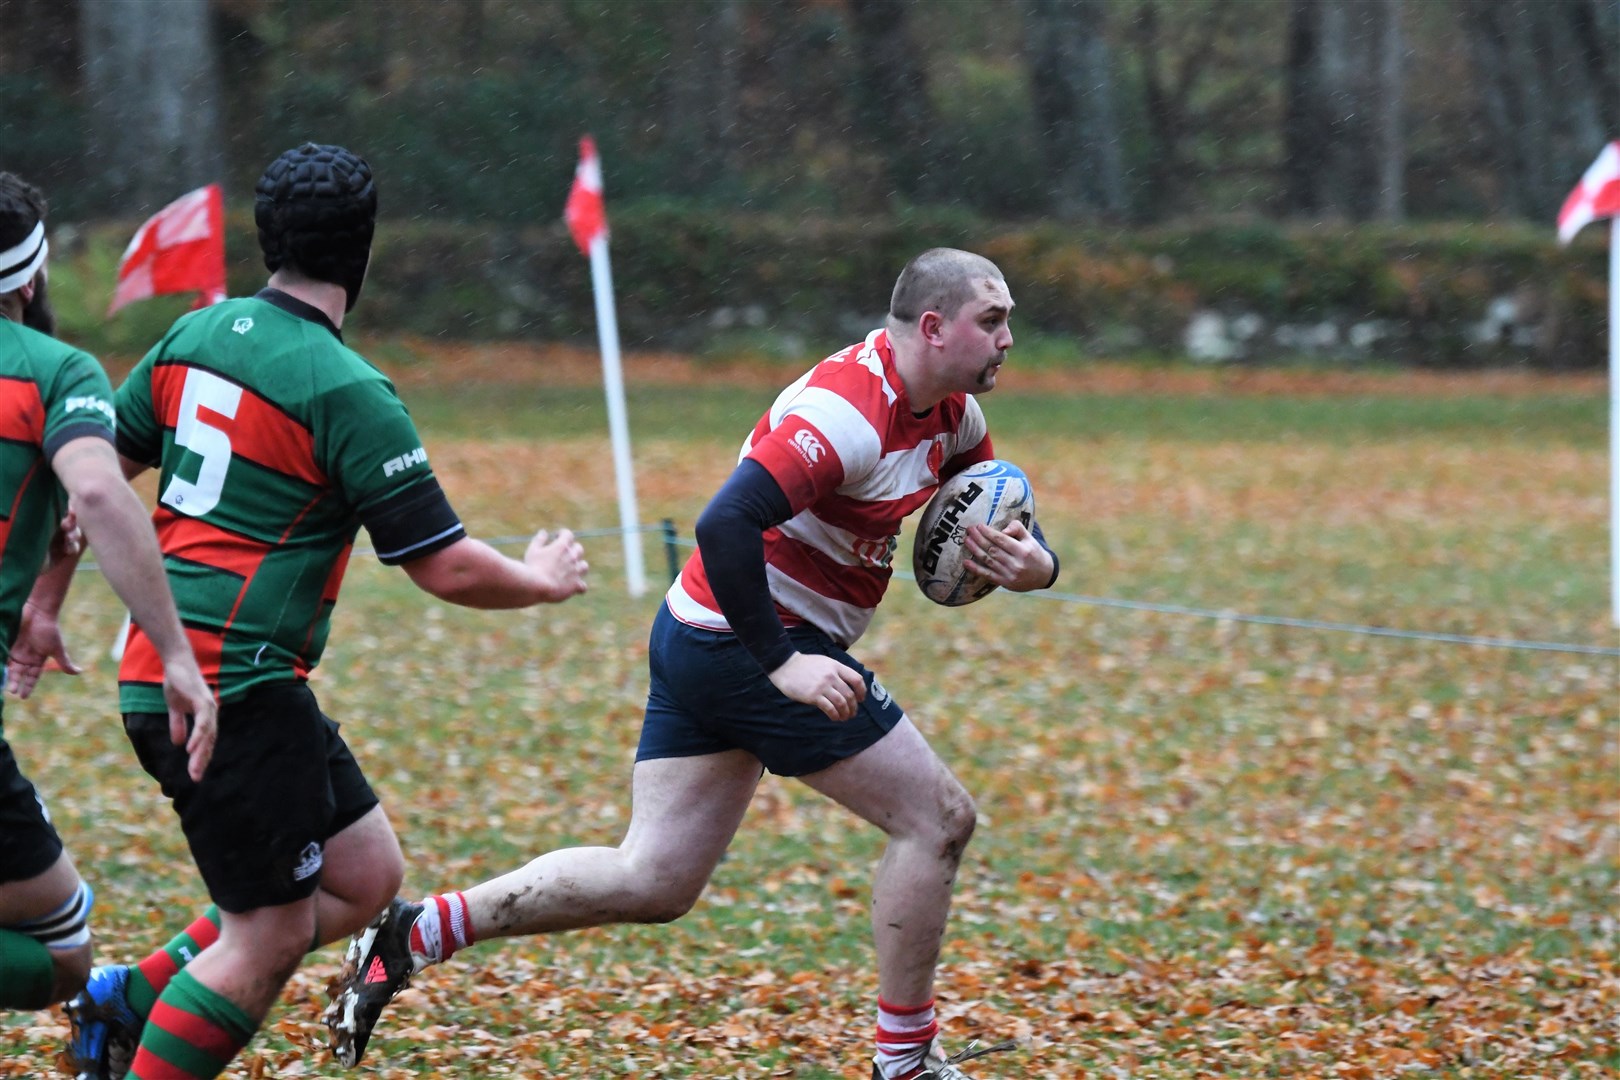 Andrew McBean breaks blind from scrum to score. Photo: James Officer